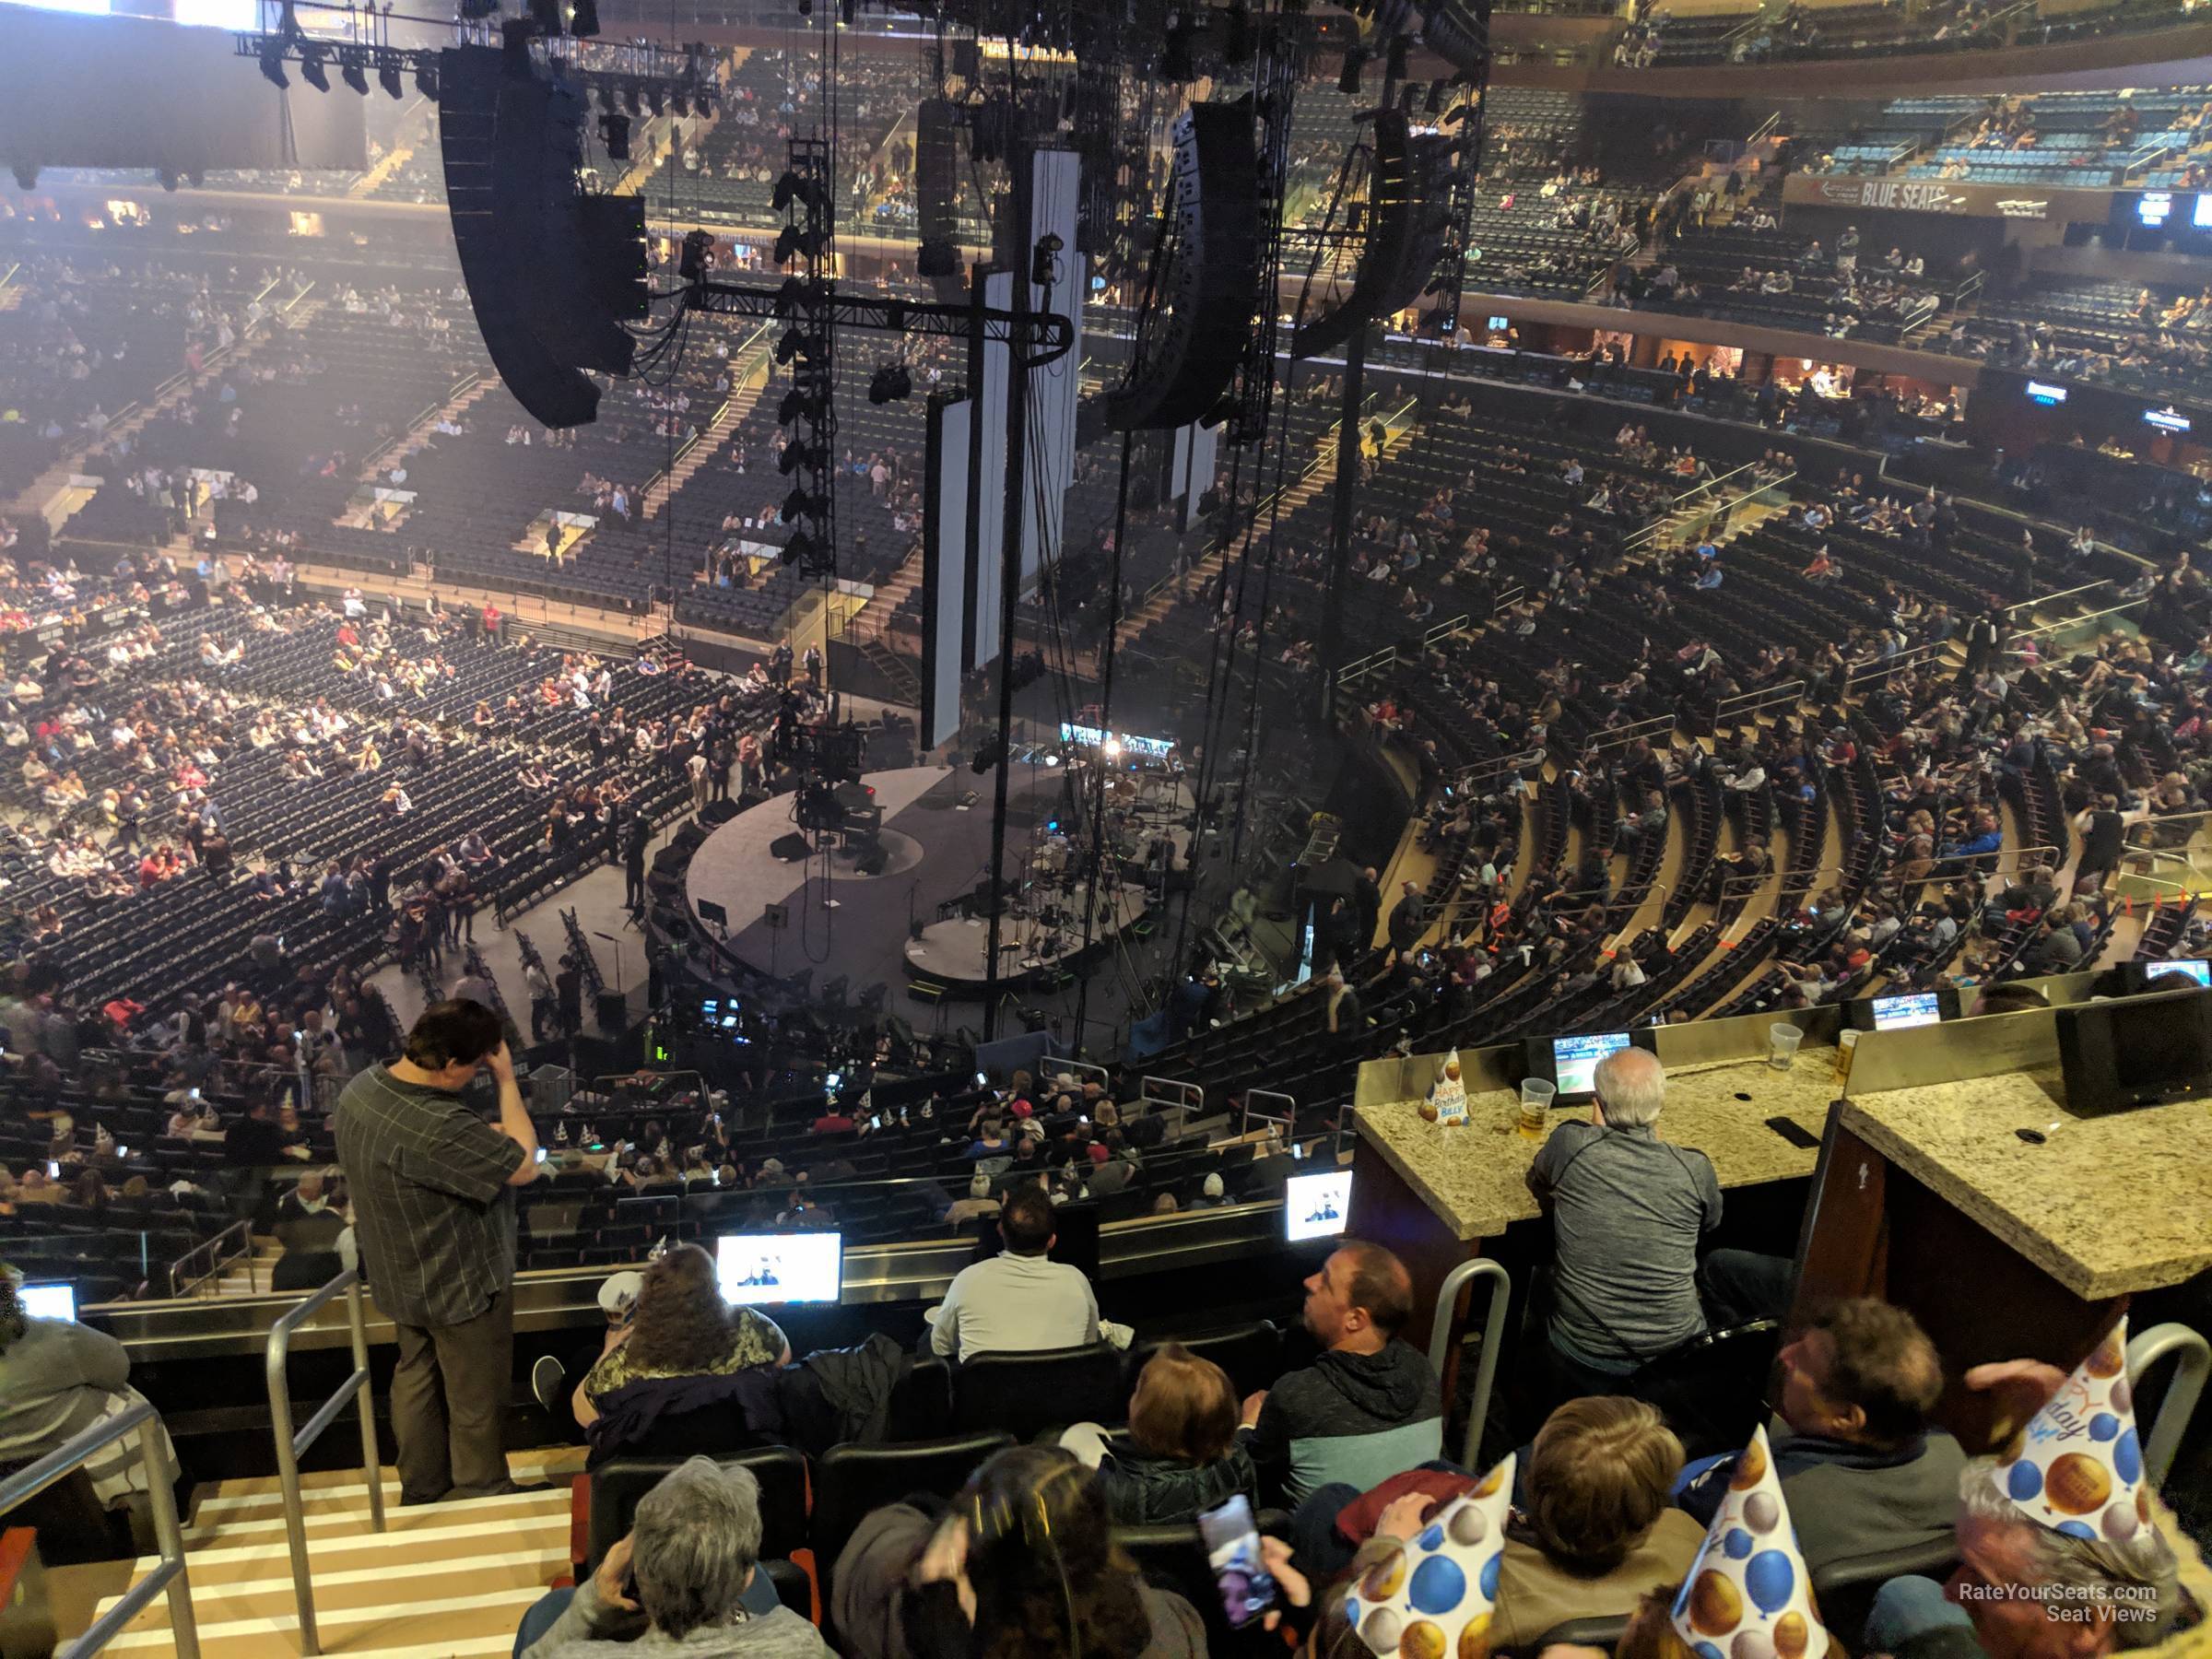 Section 215 At Madison Square Garden For Concerts Rateyourseats Com